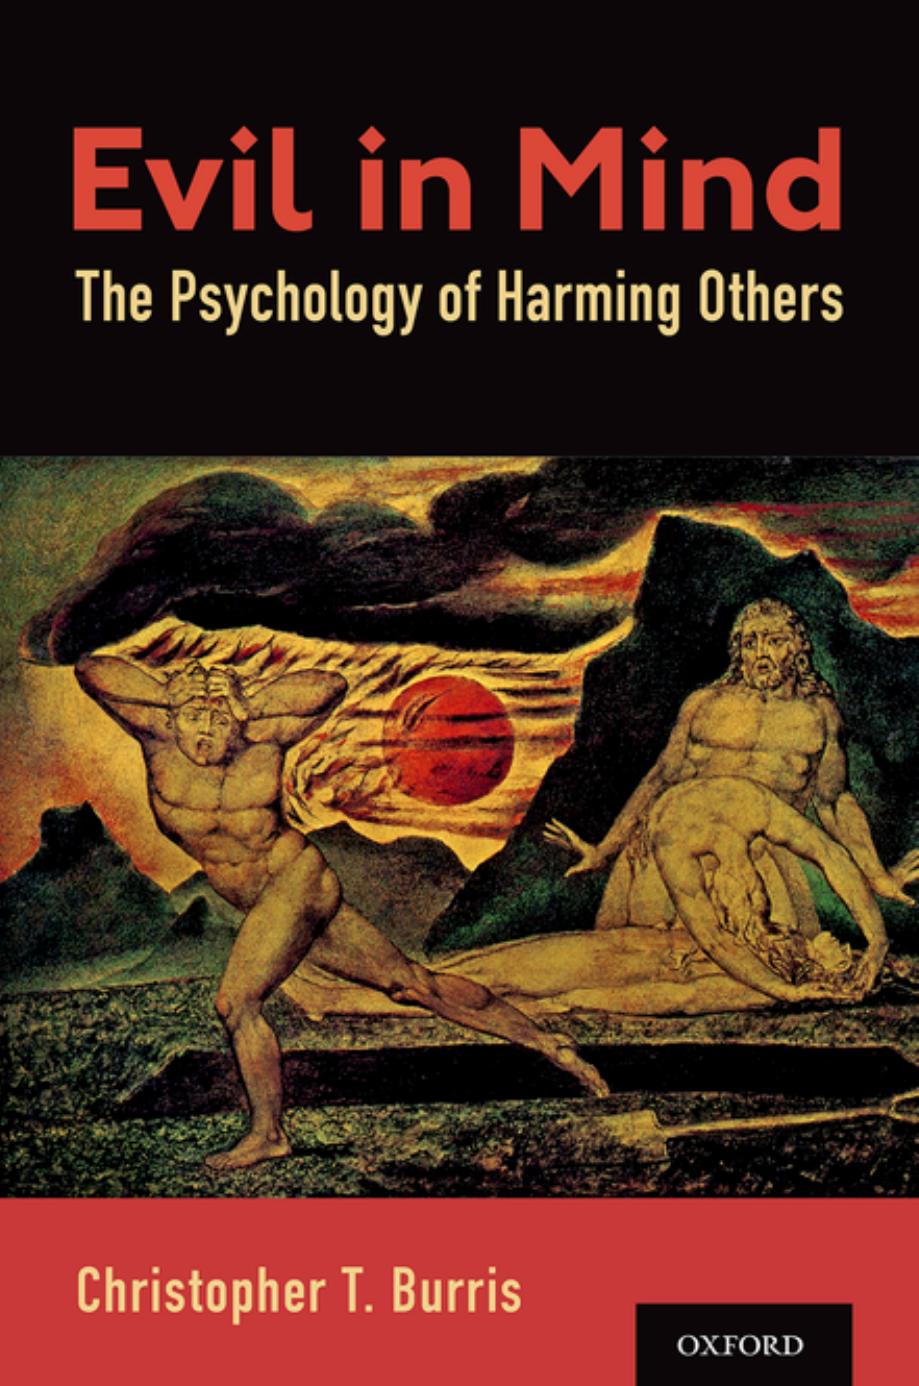 Evil in Mind: The Psychology of Harming Others